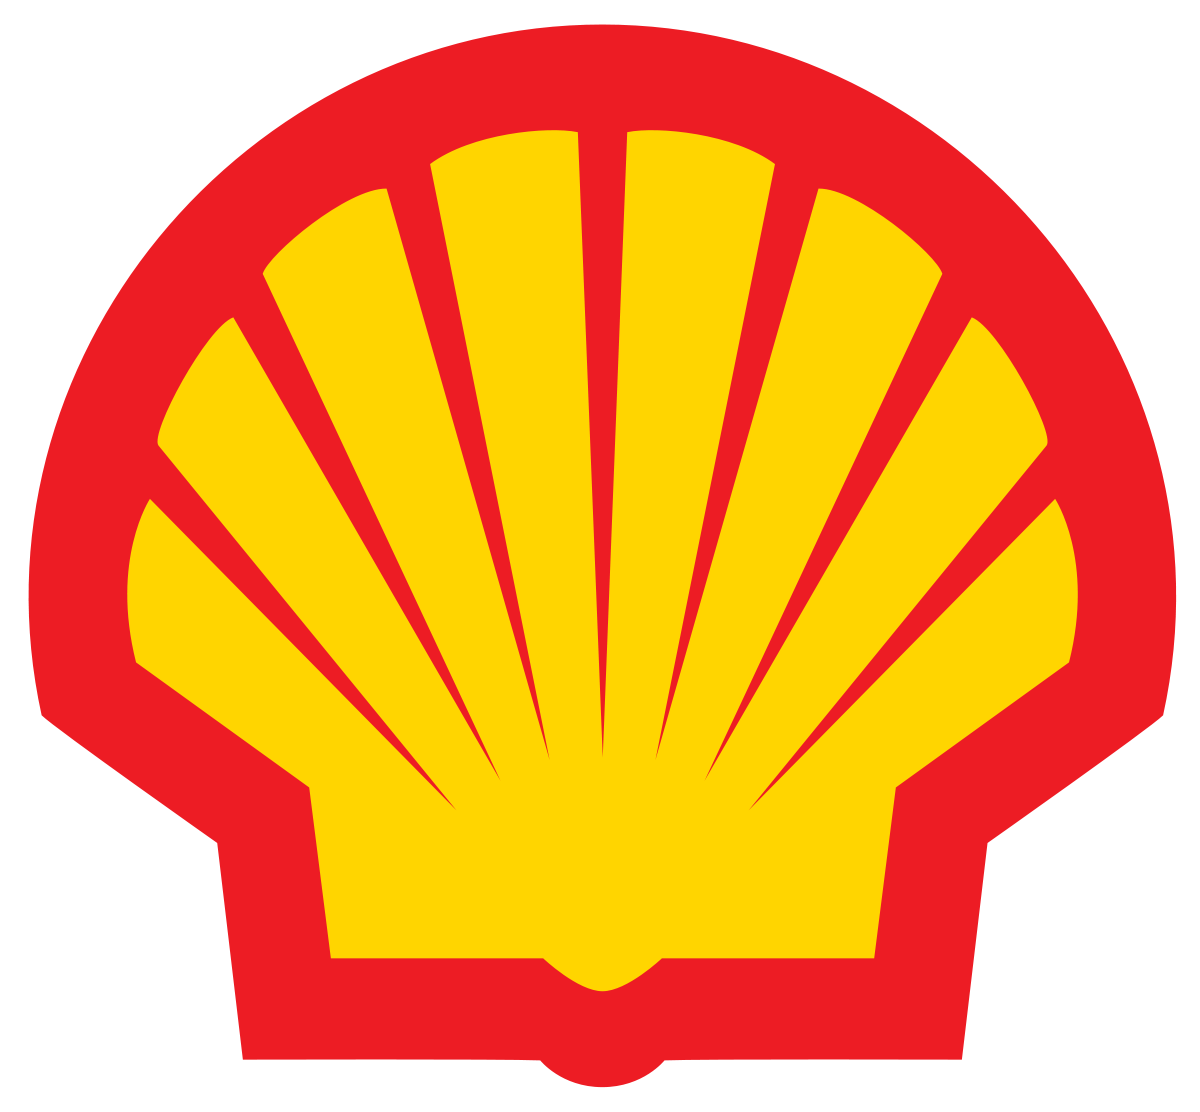 Copy of shell logo.png